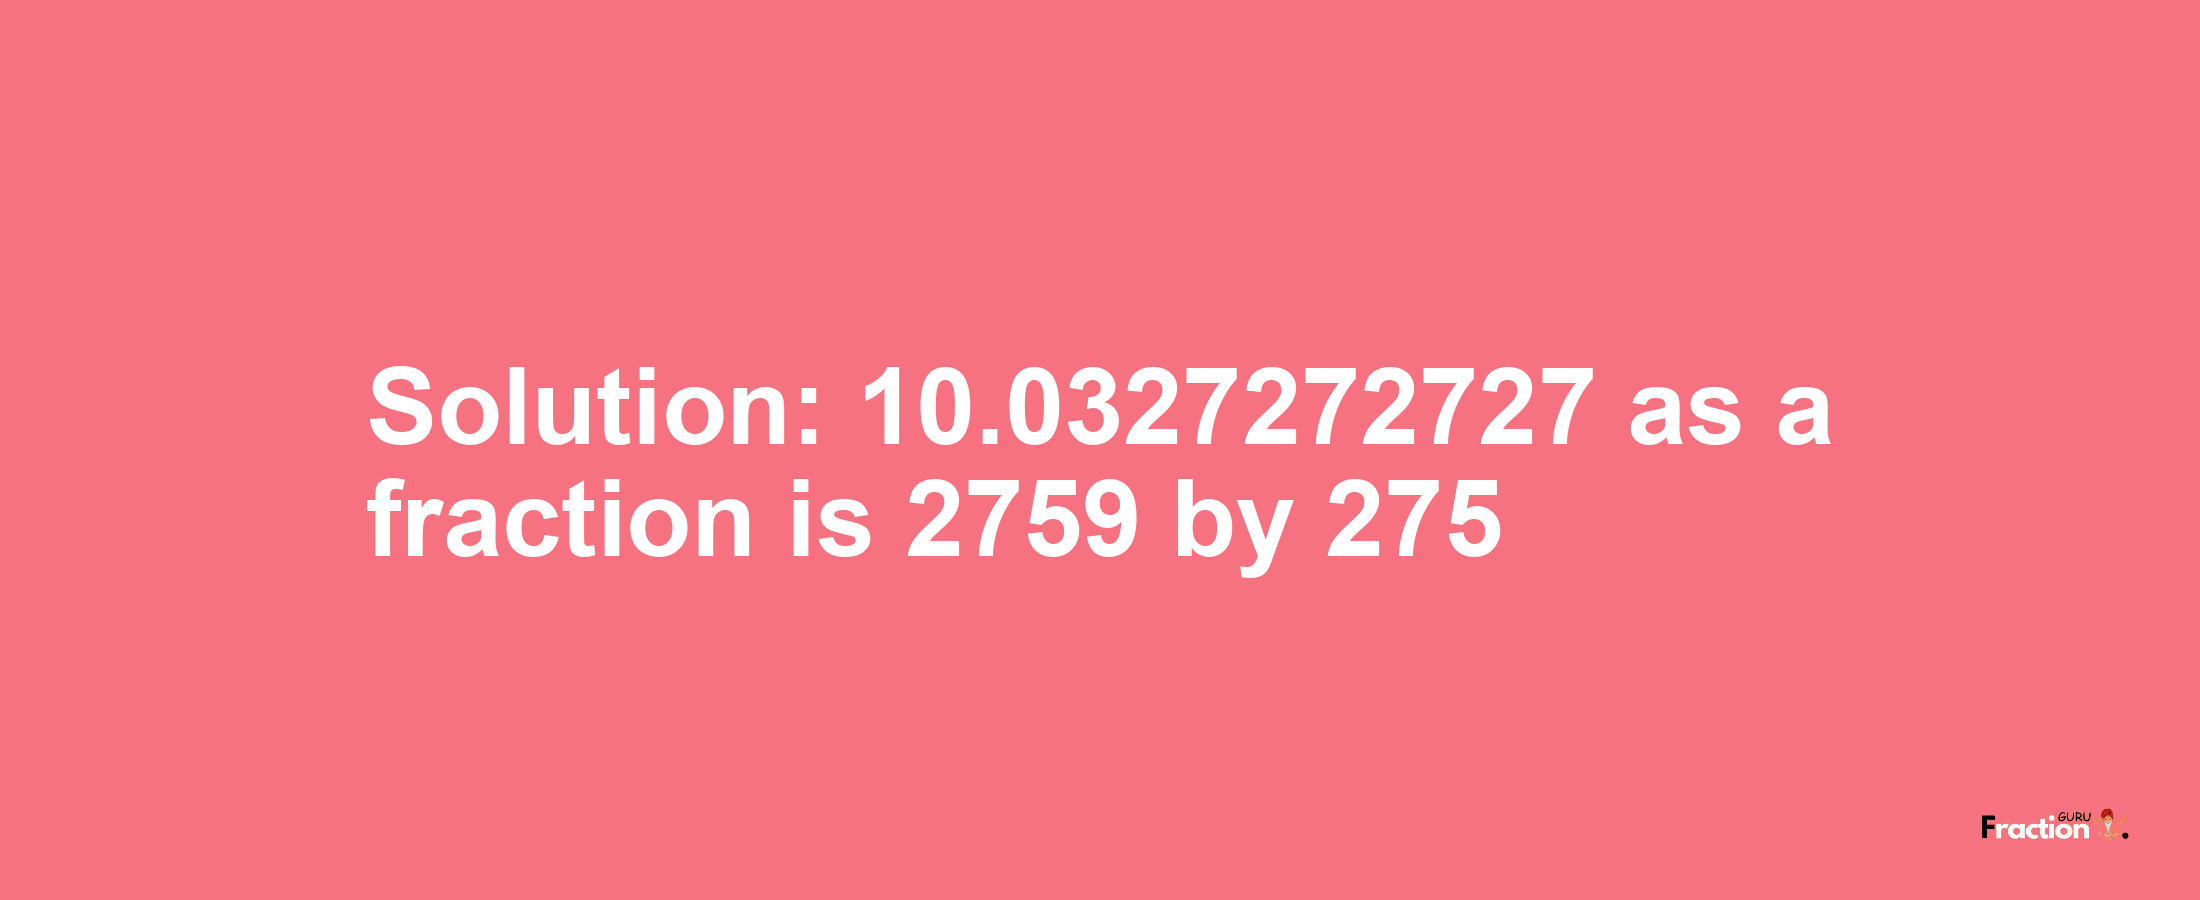 Solution:10.0327272727 as a fraction is 2759/275